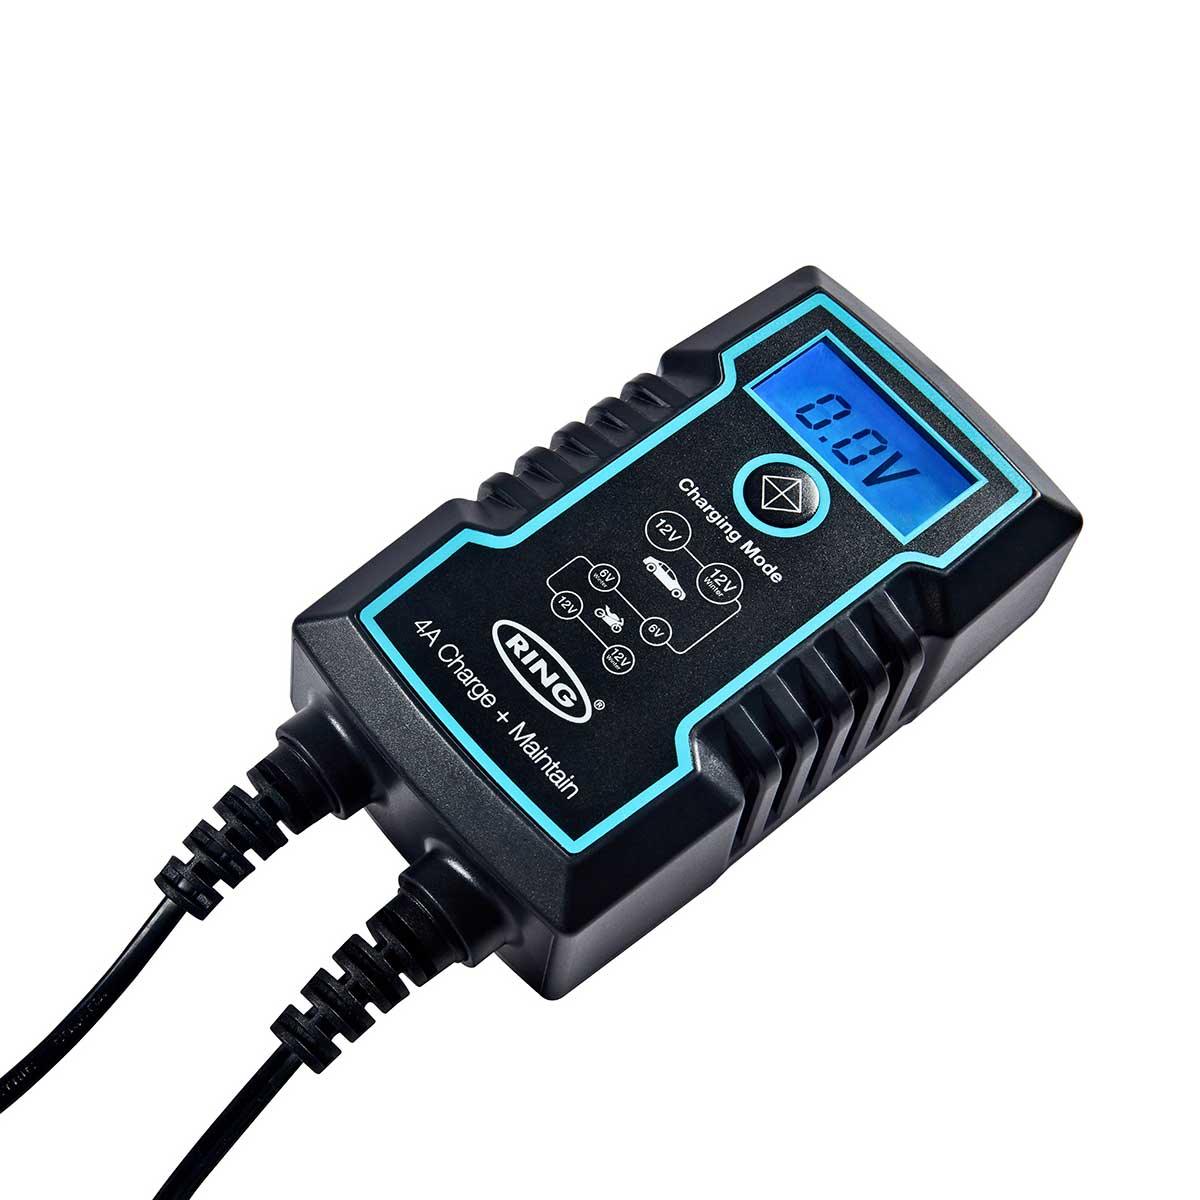 Ring 4A Car Battery Smart Charger Maintainer 6V 12V - Black - Browse our range of Care: Chargers - getgearedshop 